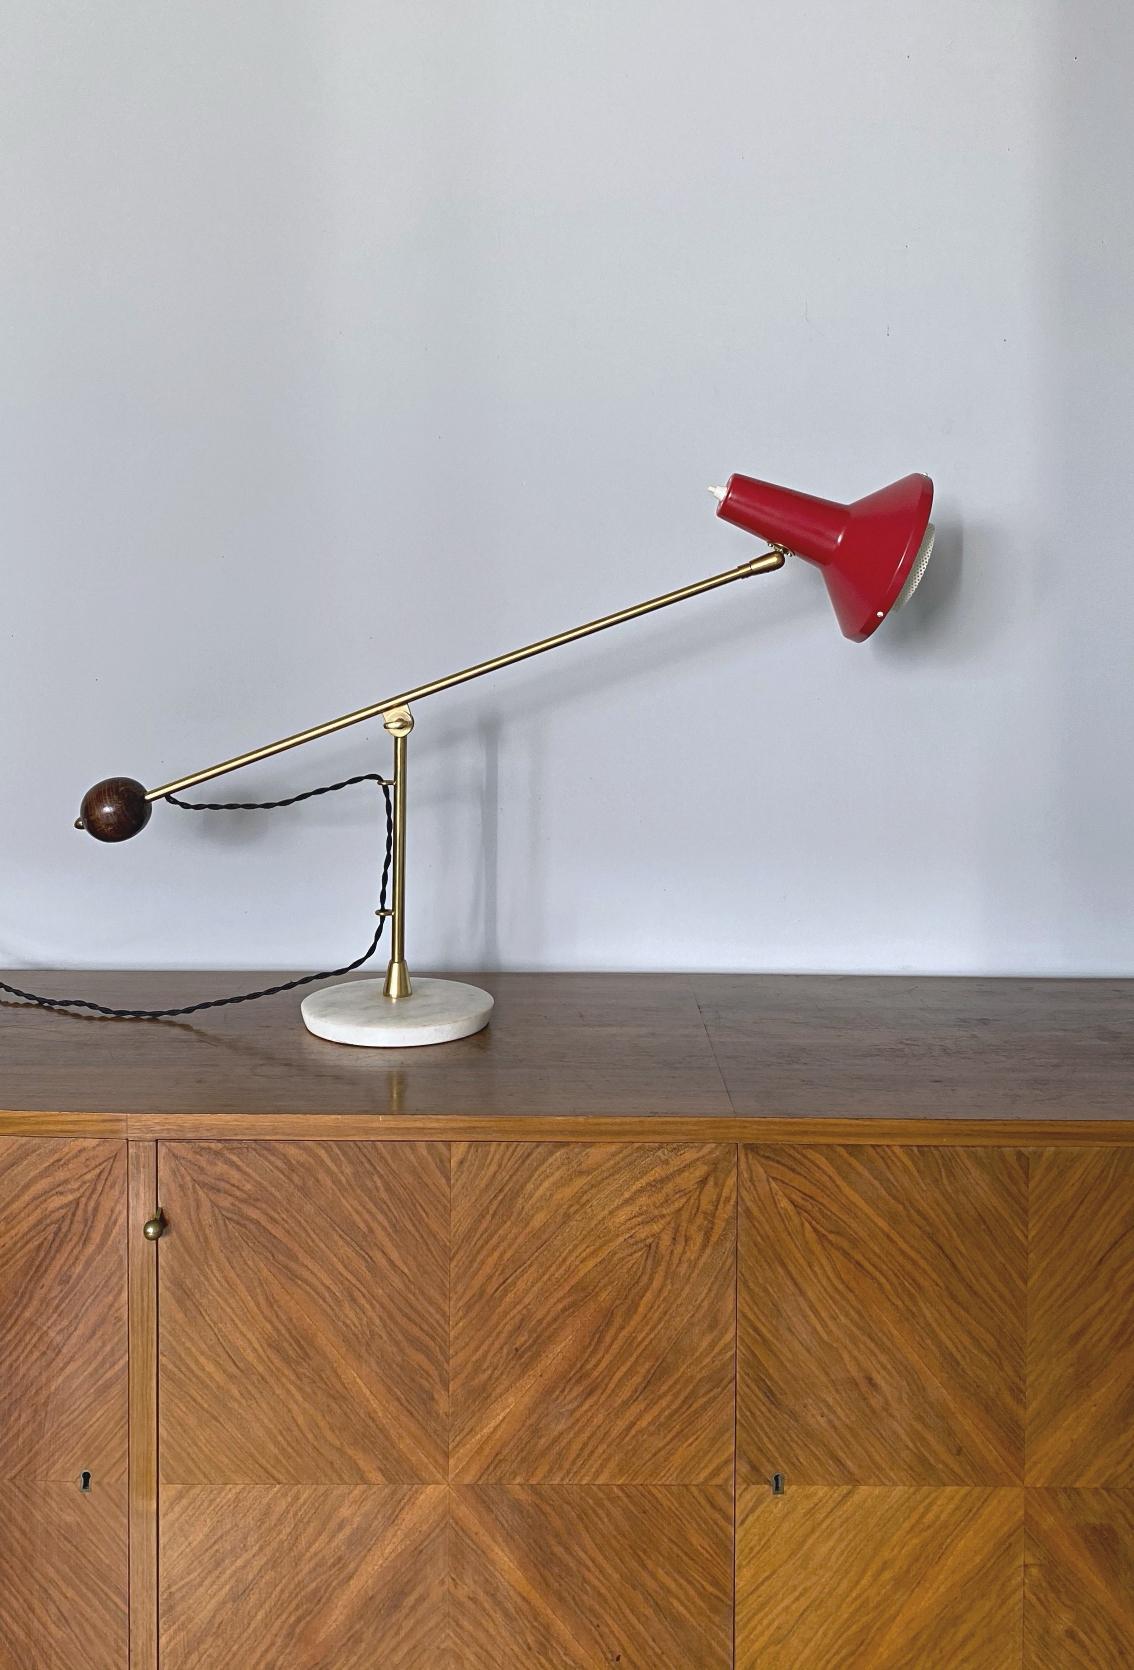 Iconic midcentury desk lamp made of brass with red shade and Carrara marble base. Minimalistic design from the 1950s - round shade with mesh inner ring that provides beautiful light. Excellent condition without bumps or dents. Fully newly rewired